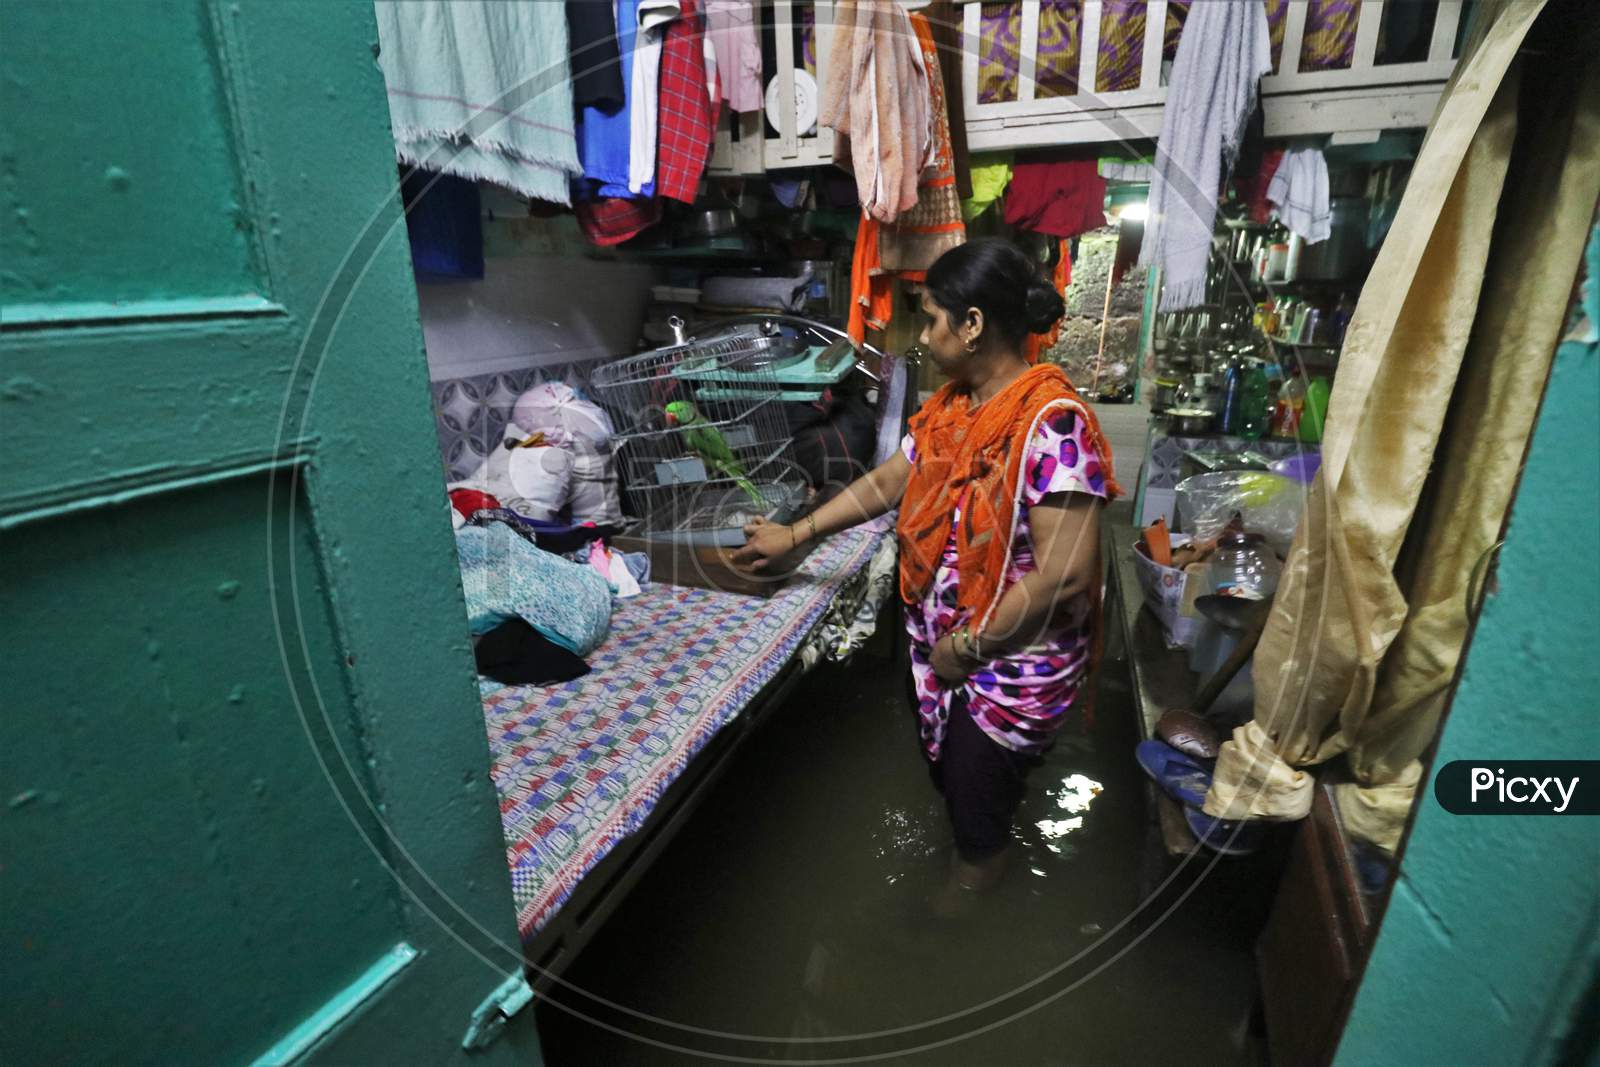 A woman is seen inside her house that is waterlogged due heavy rains, in Mumbai, India on September 23, 2020.